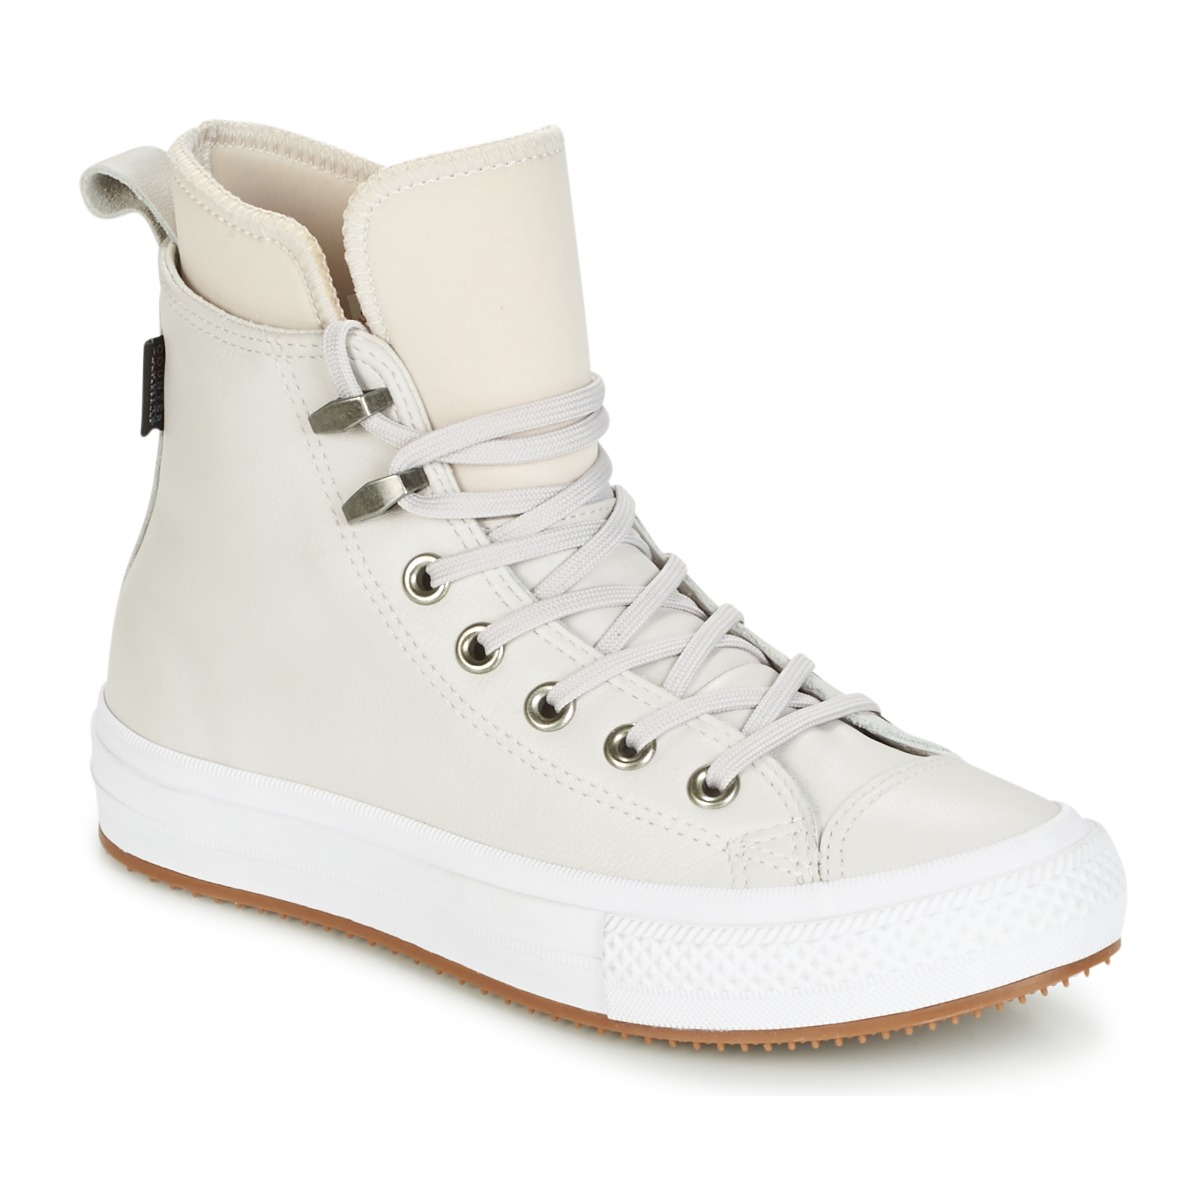 Converse CHUCK TAYLOR WP BOOT WP LEATHER HI PALE PUTTY/PALE PUTTY/WHITE Rose / Blanc